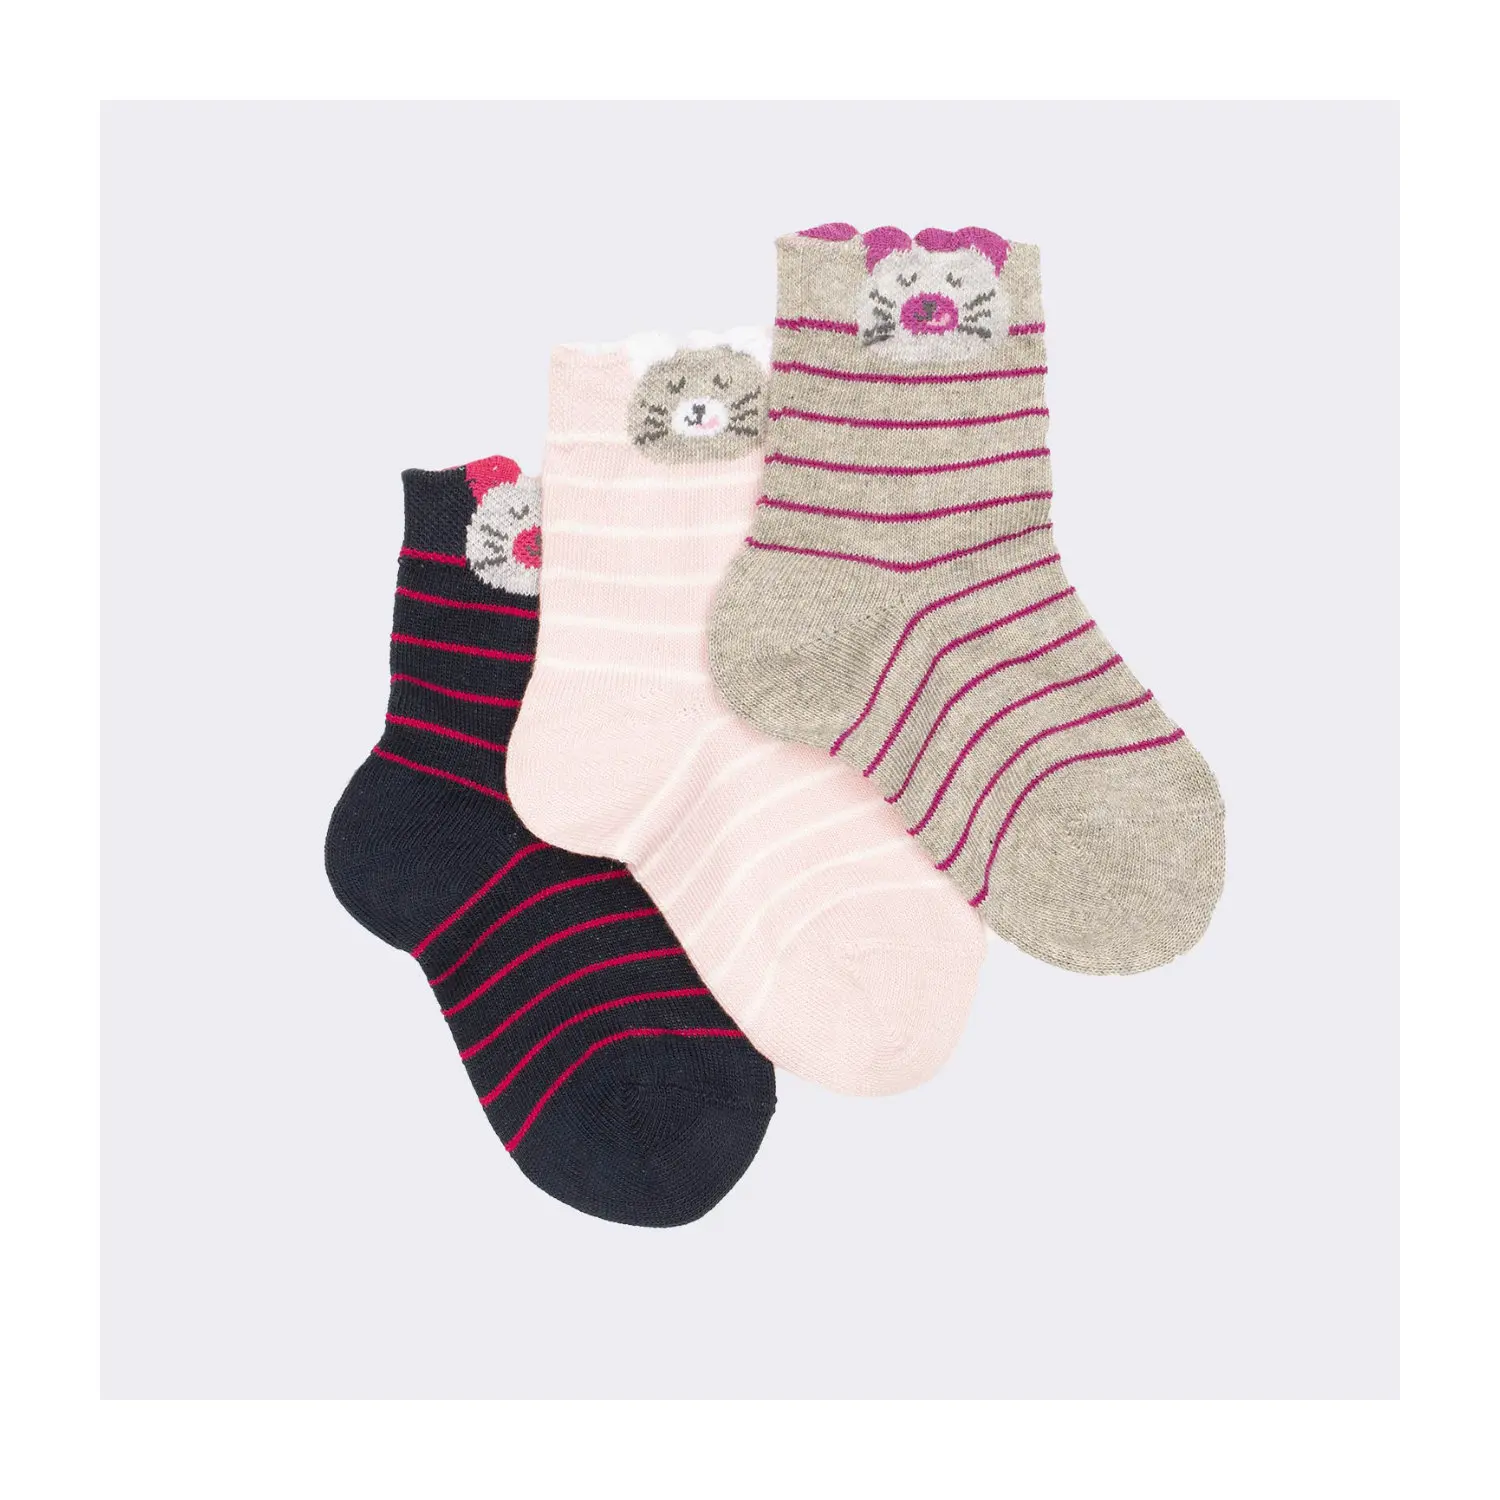 Factory Wholesale - Made in Italy Socks Baby different Patterns - Organic Cotton Baby Socks for Boys and Girls - kids socks